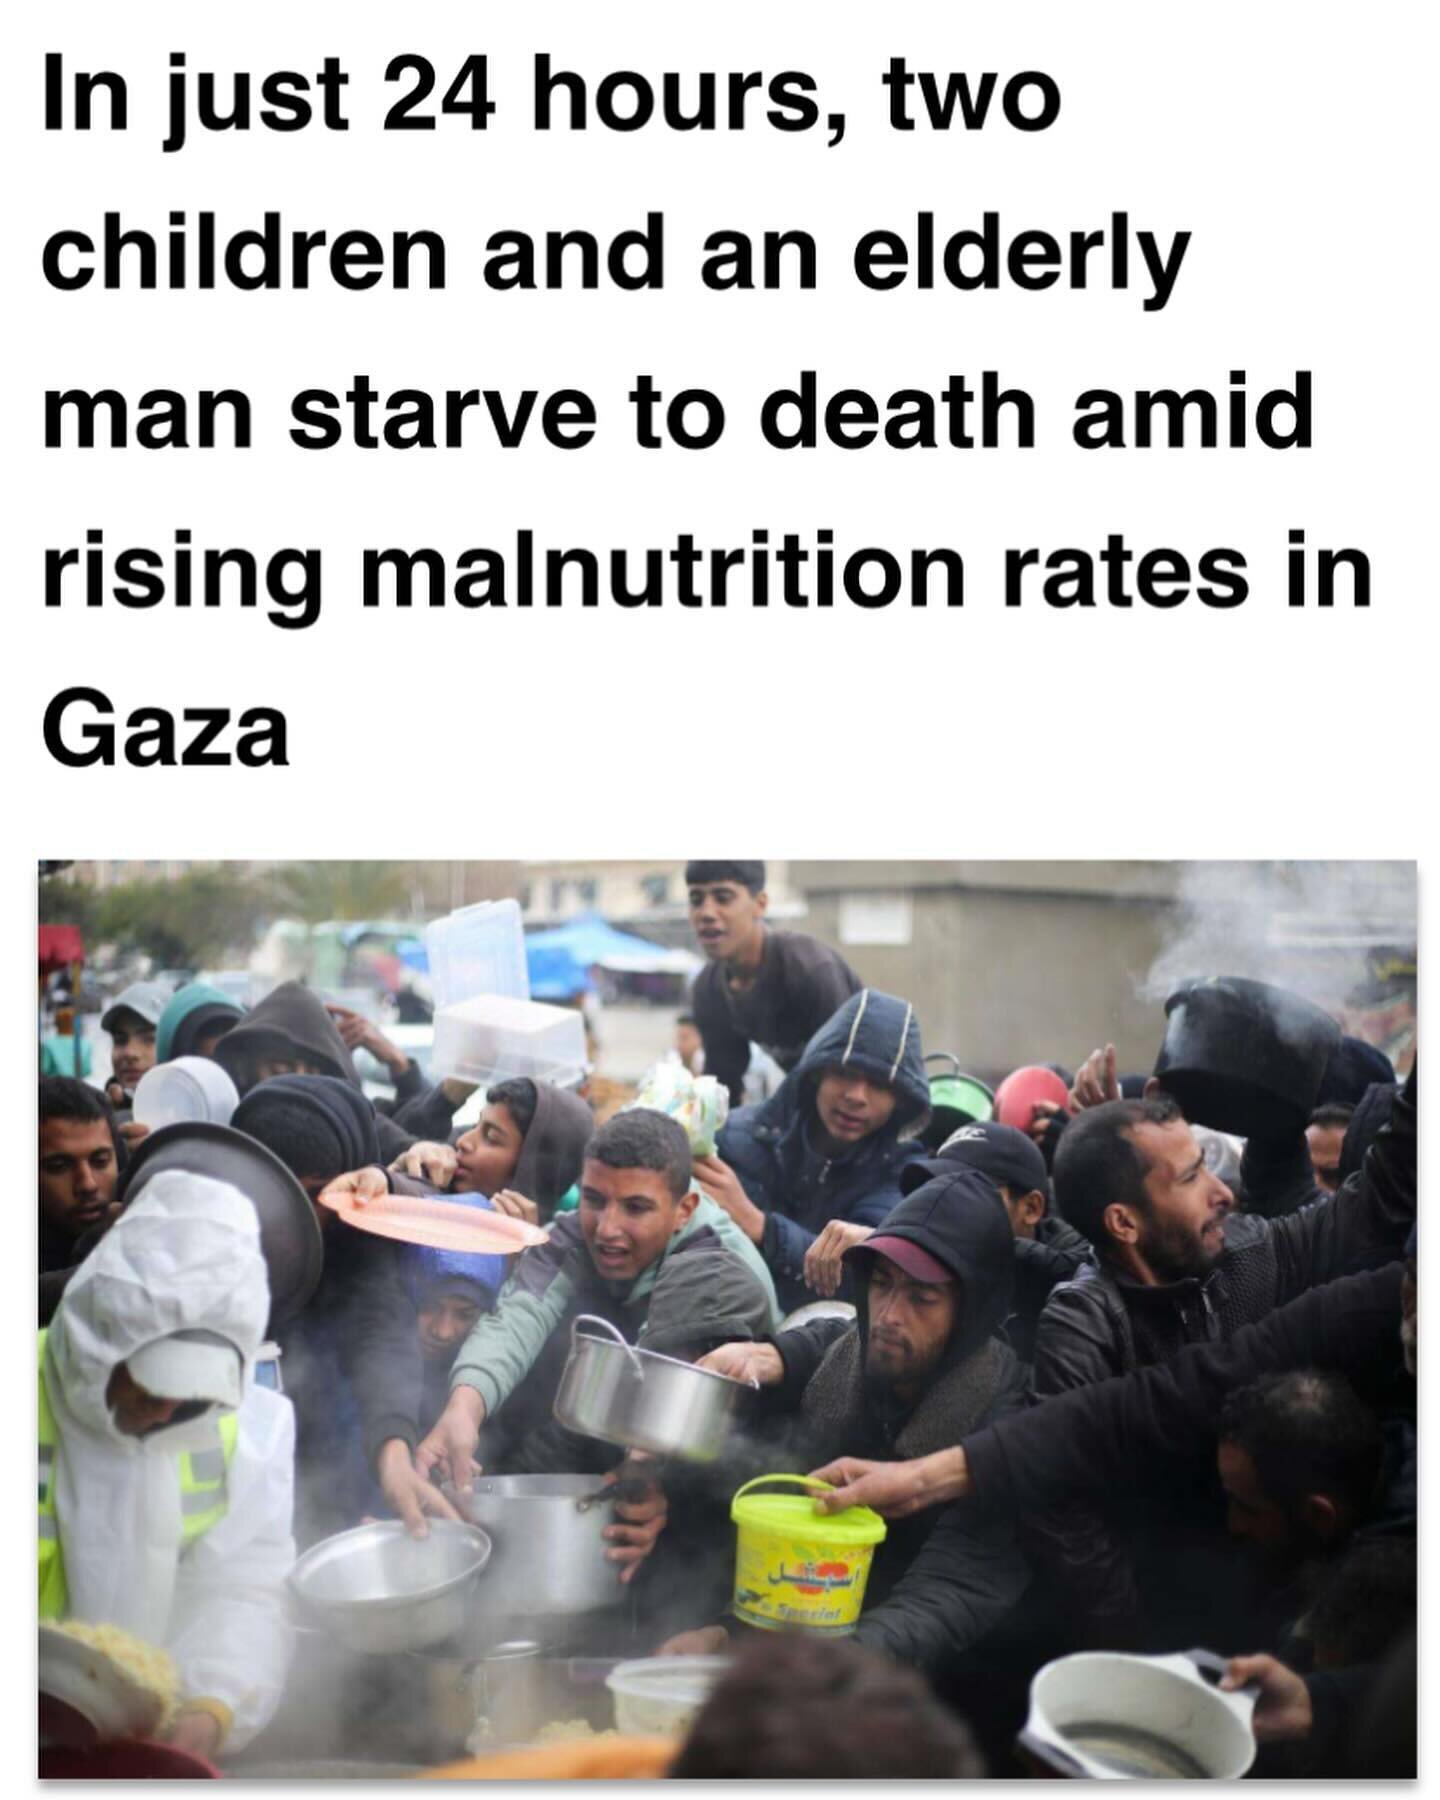 Religion, nationalism, and media corruption all lie at the roots of the brainwashed actions &amp; justifications of this horrific genocide. The famine now unfolding in Gaza is not some unavoidable natural disaster, it is directly tied to the actions 